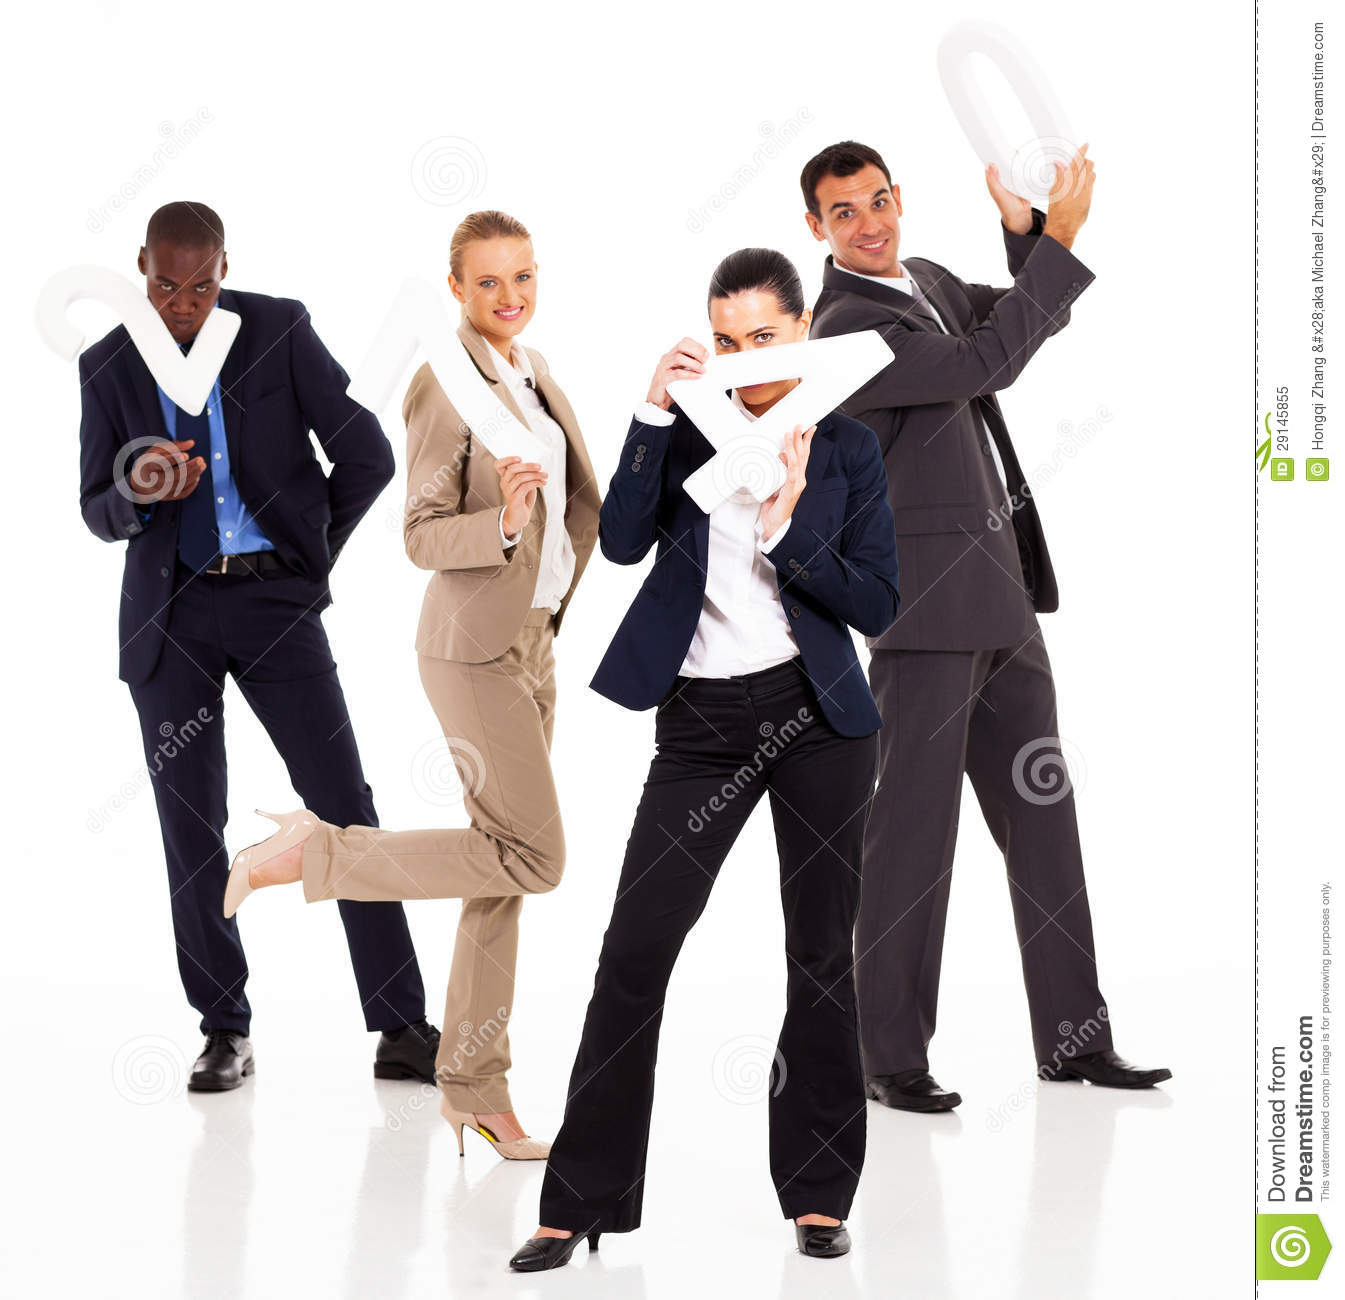 14 Funny Business People Stock Photo Images